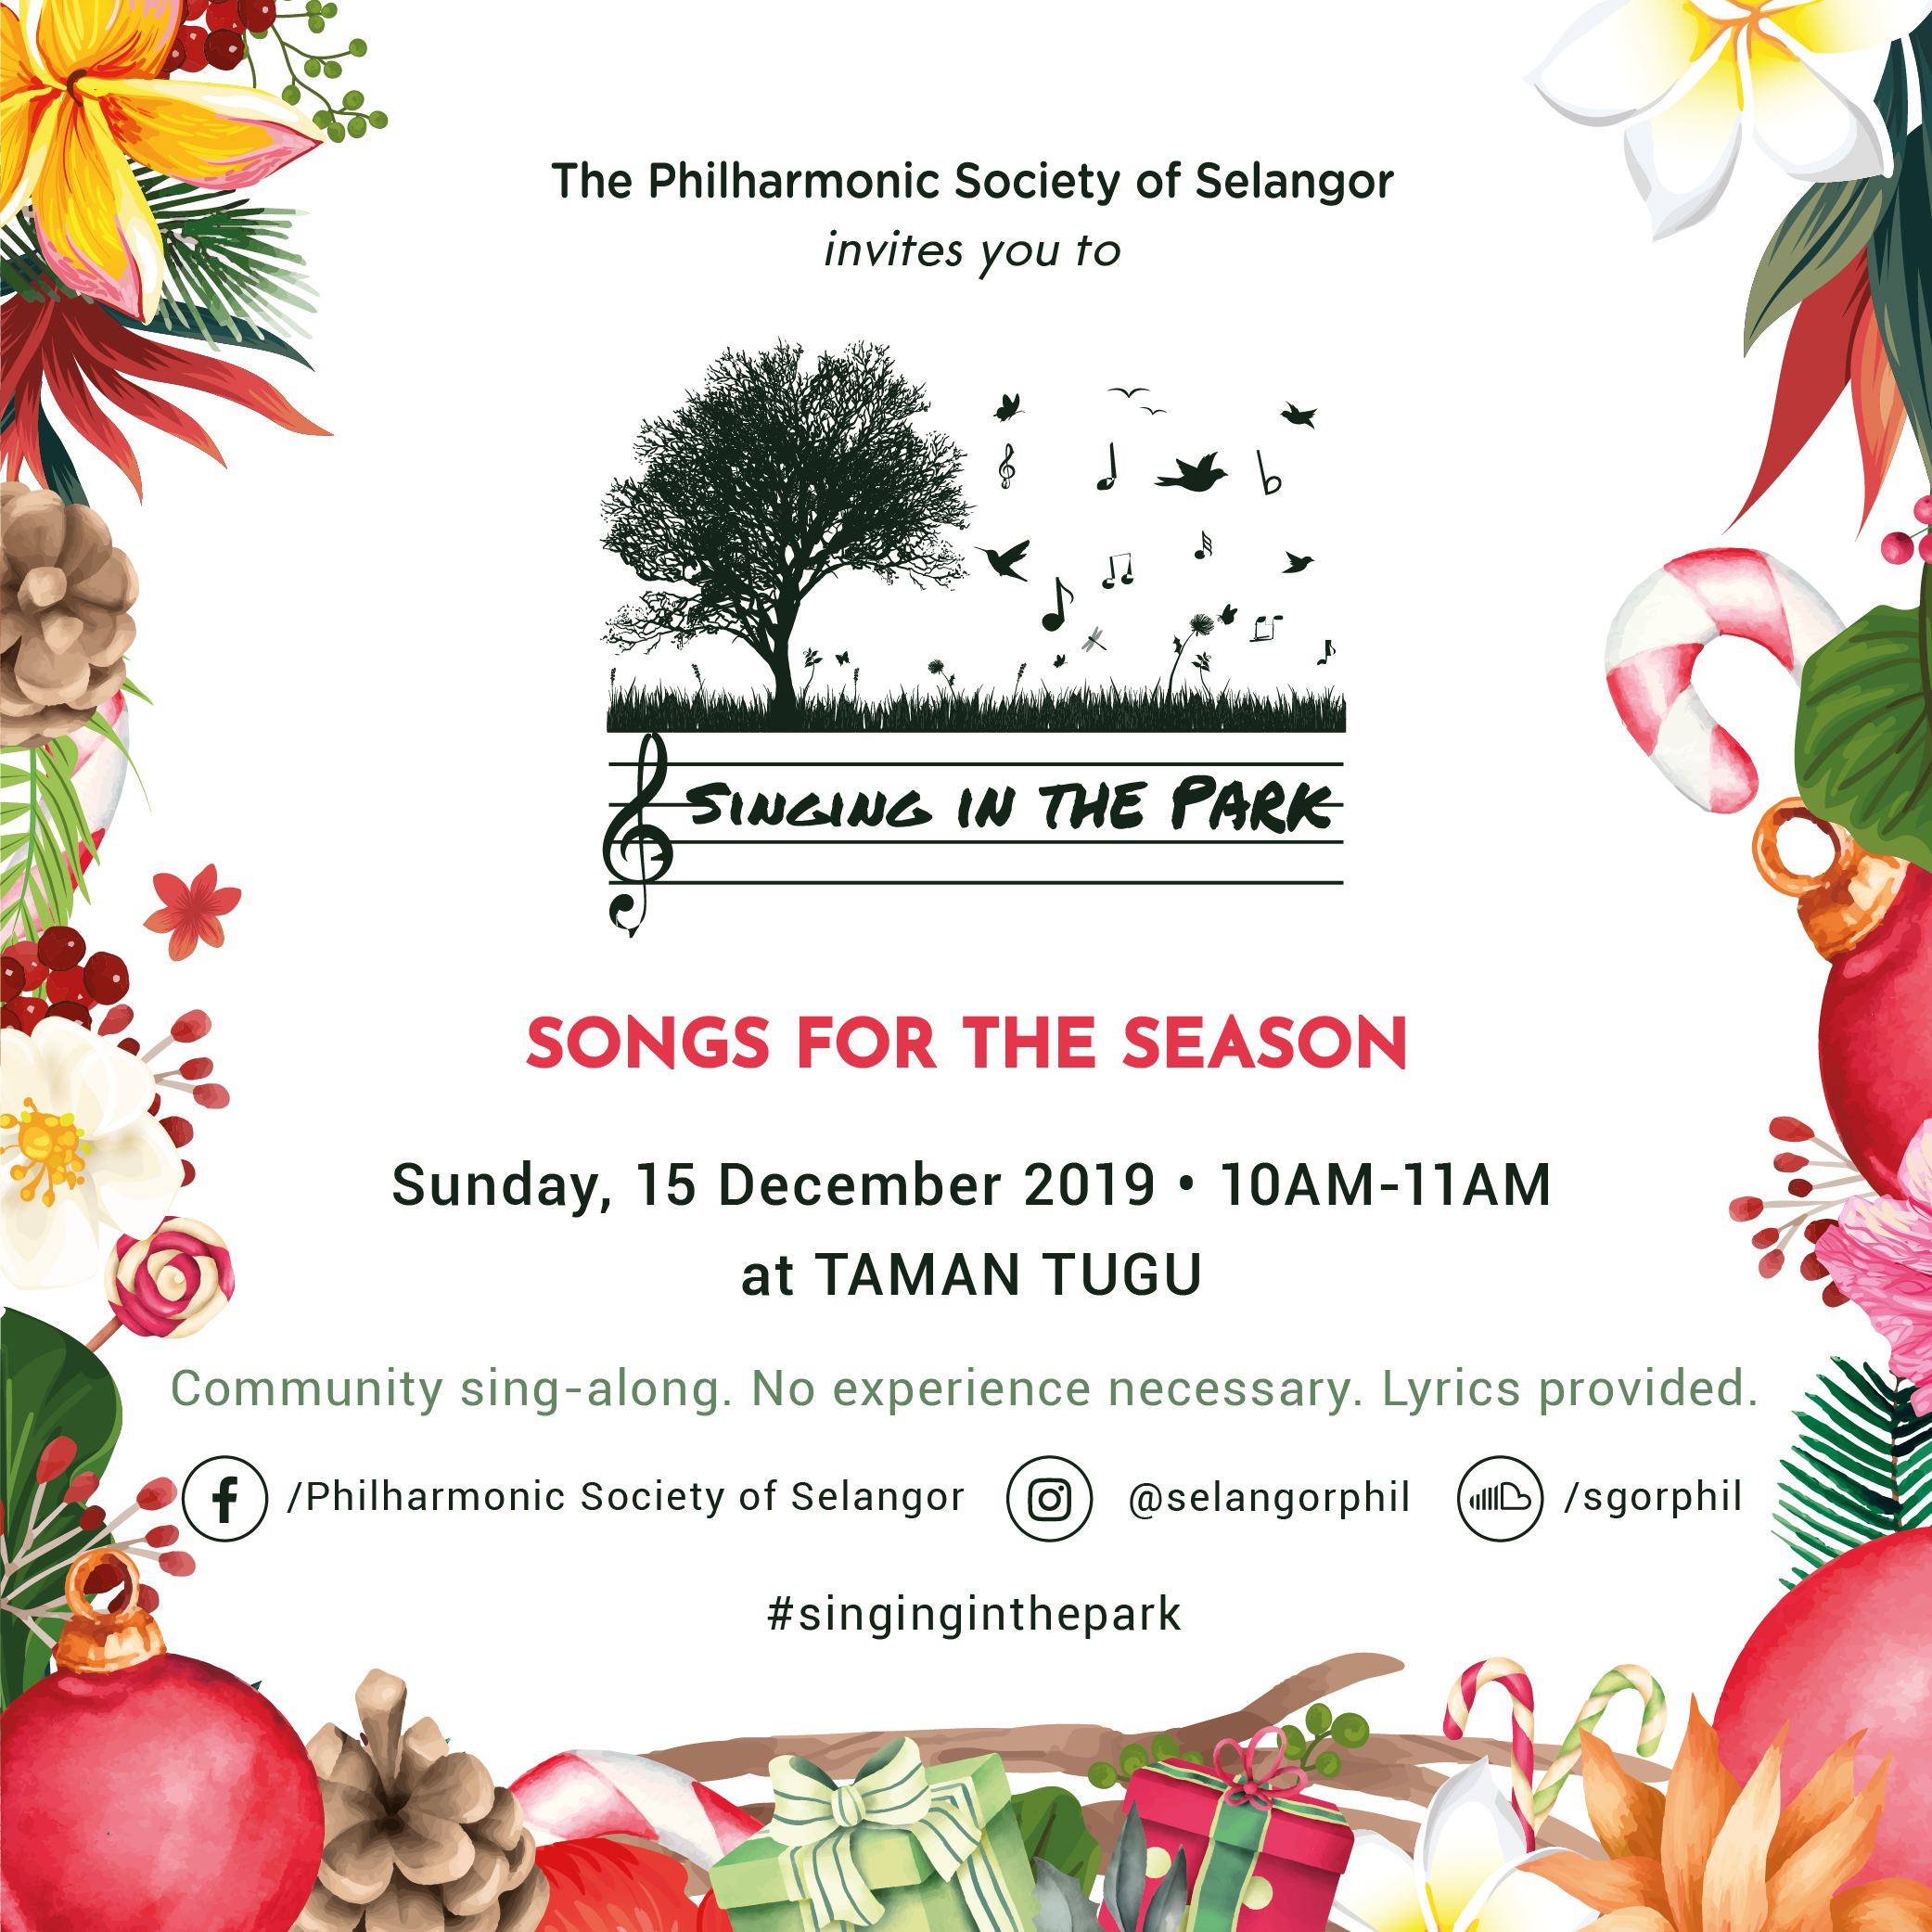 Singing in the Park "Songs for the Season"